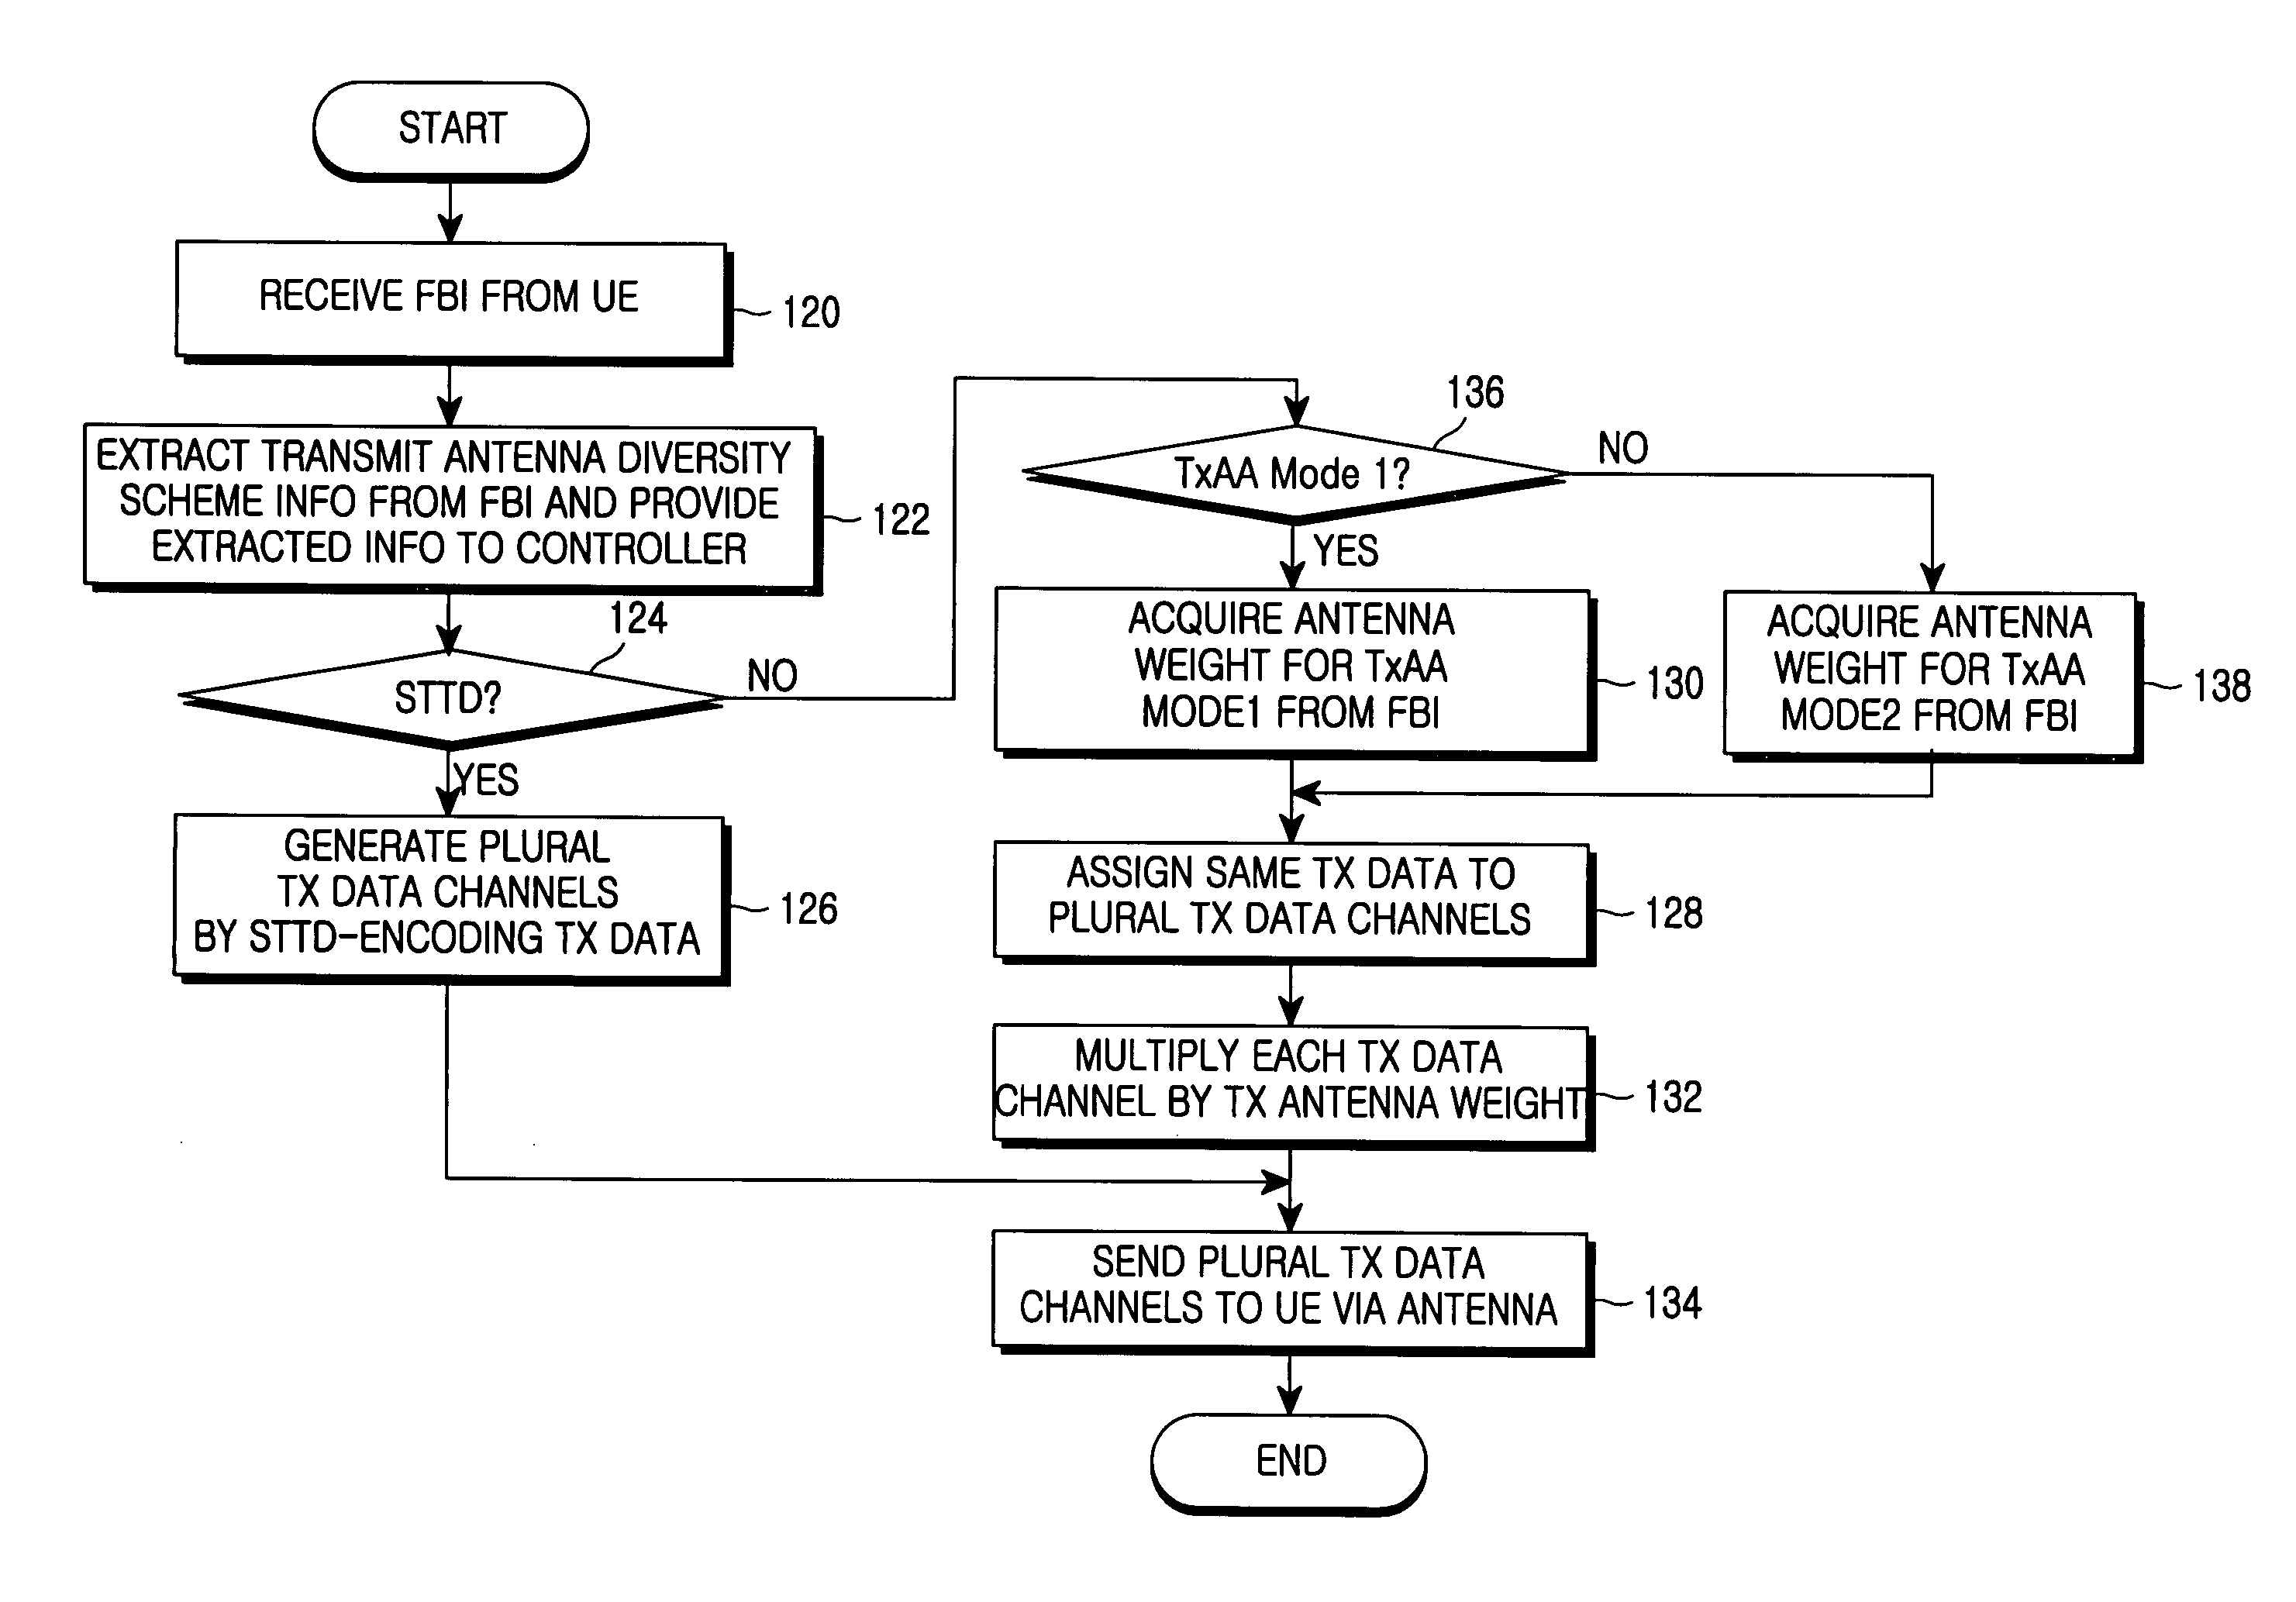 Adaptive transmit antenna diversity apparatus and method in a mobile communication system